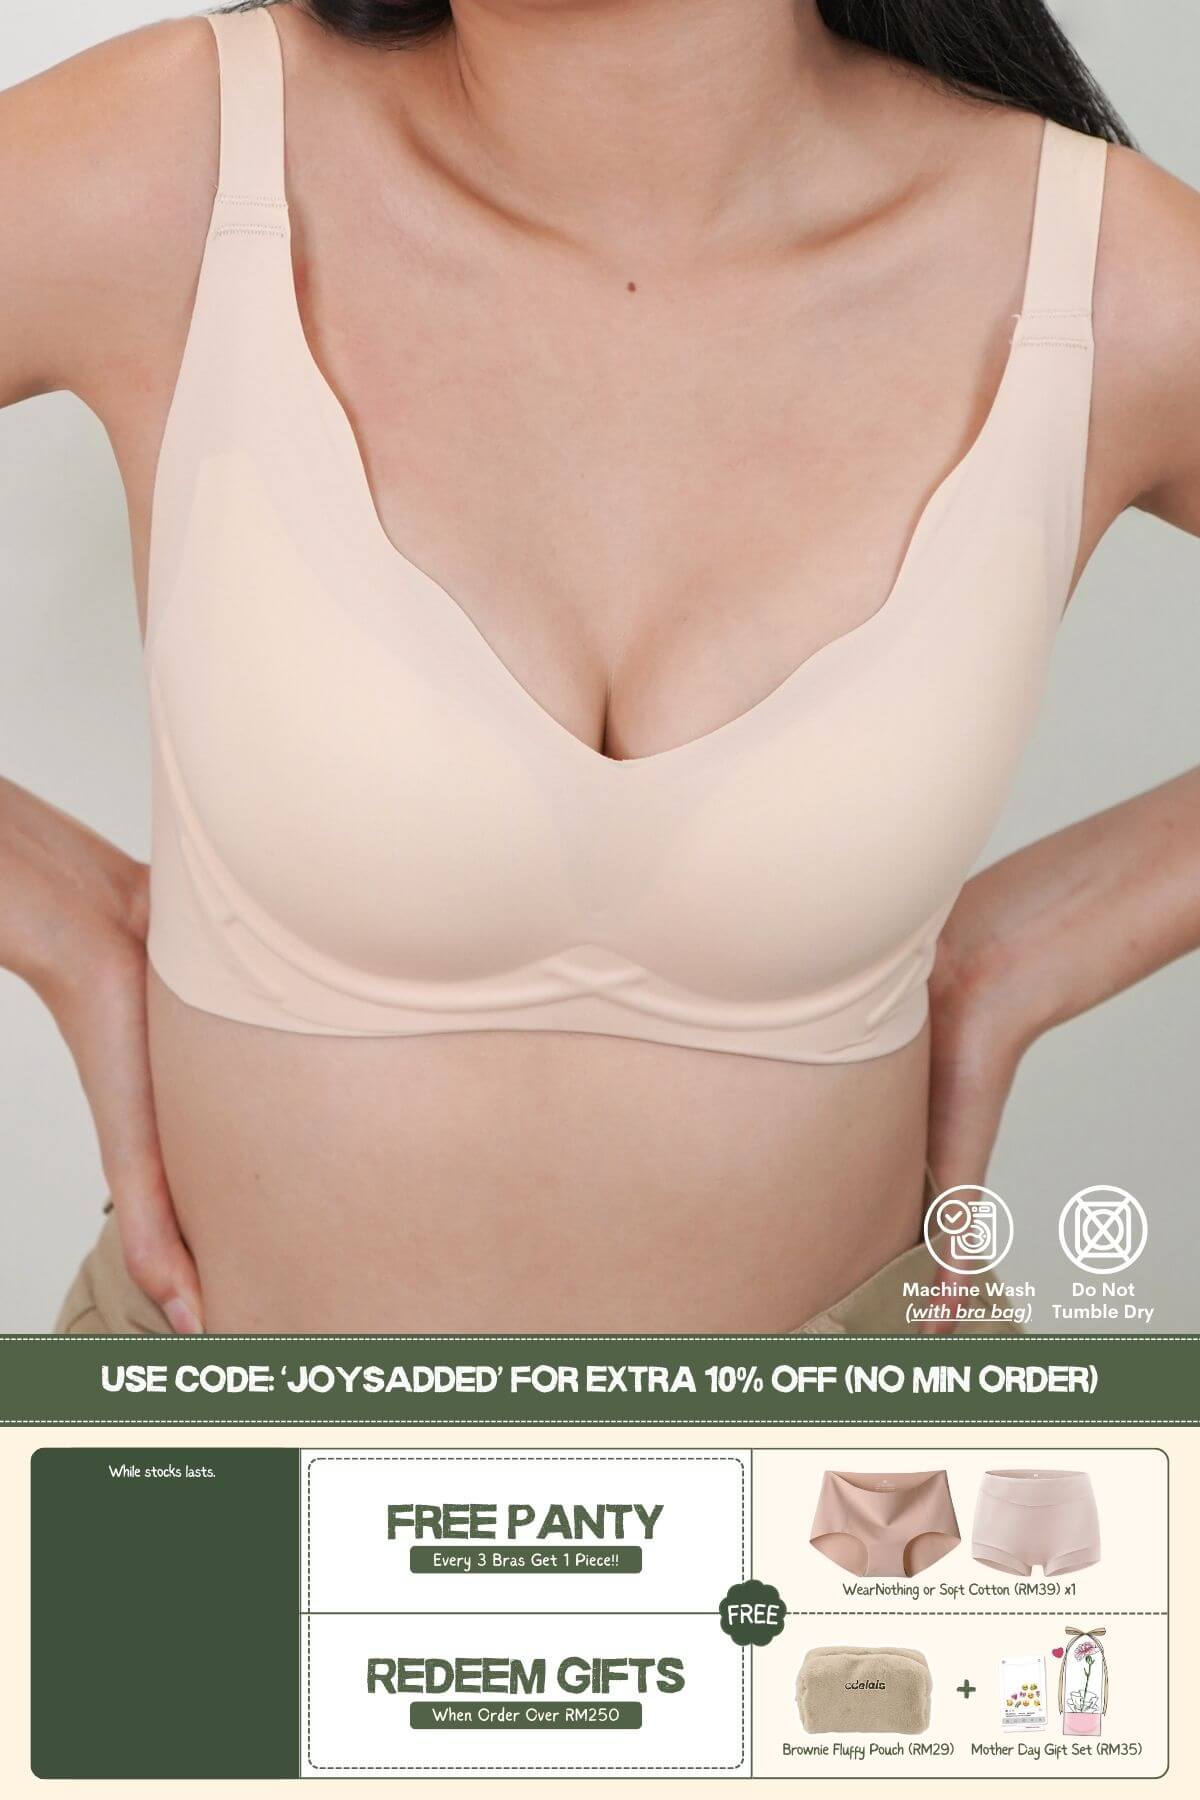 [Star Product] Wavy Support Antigravity Seamless Bra In Blanched Almond - Adelais Official